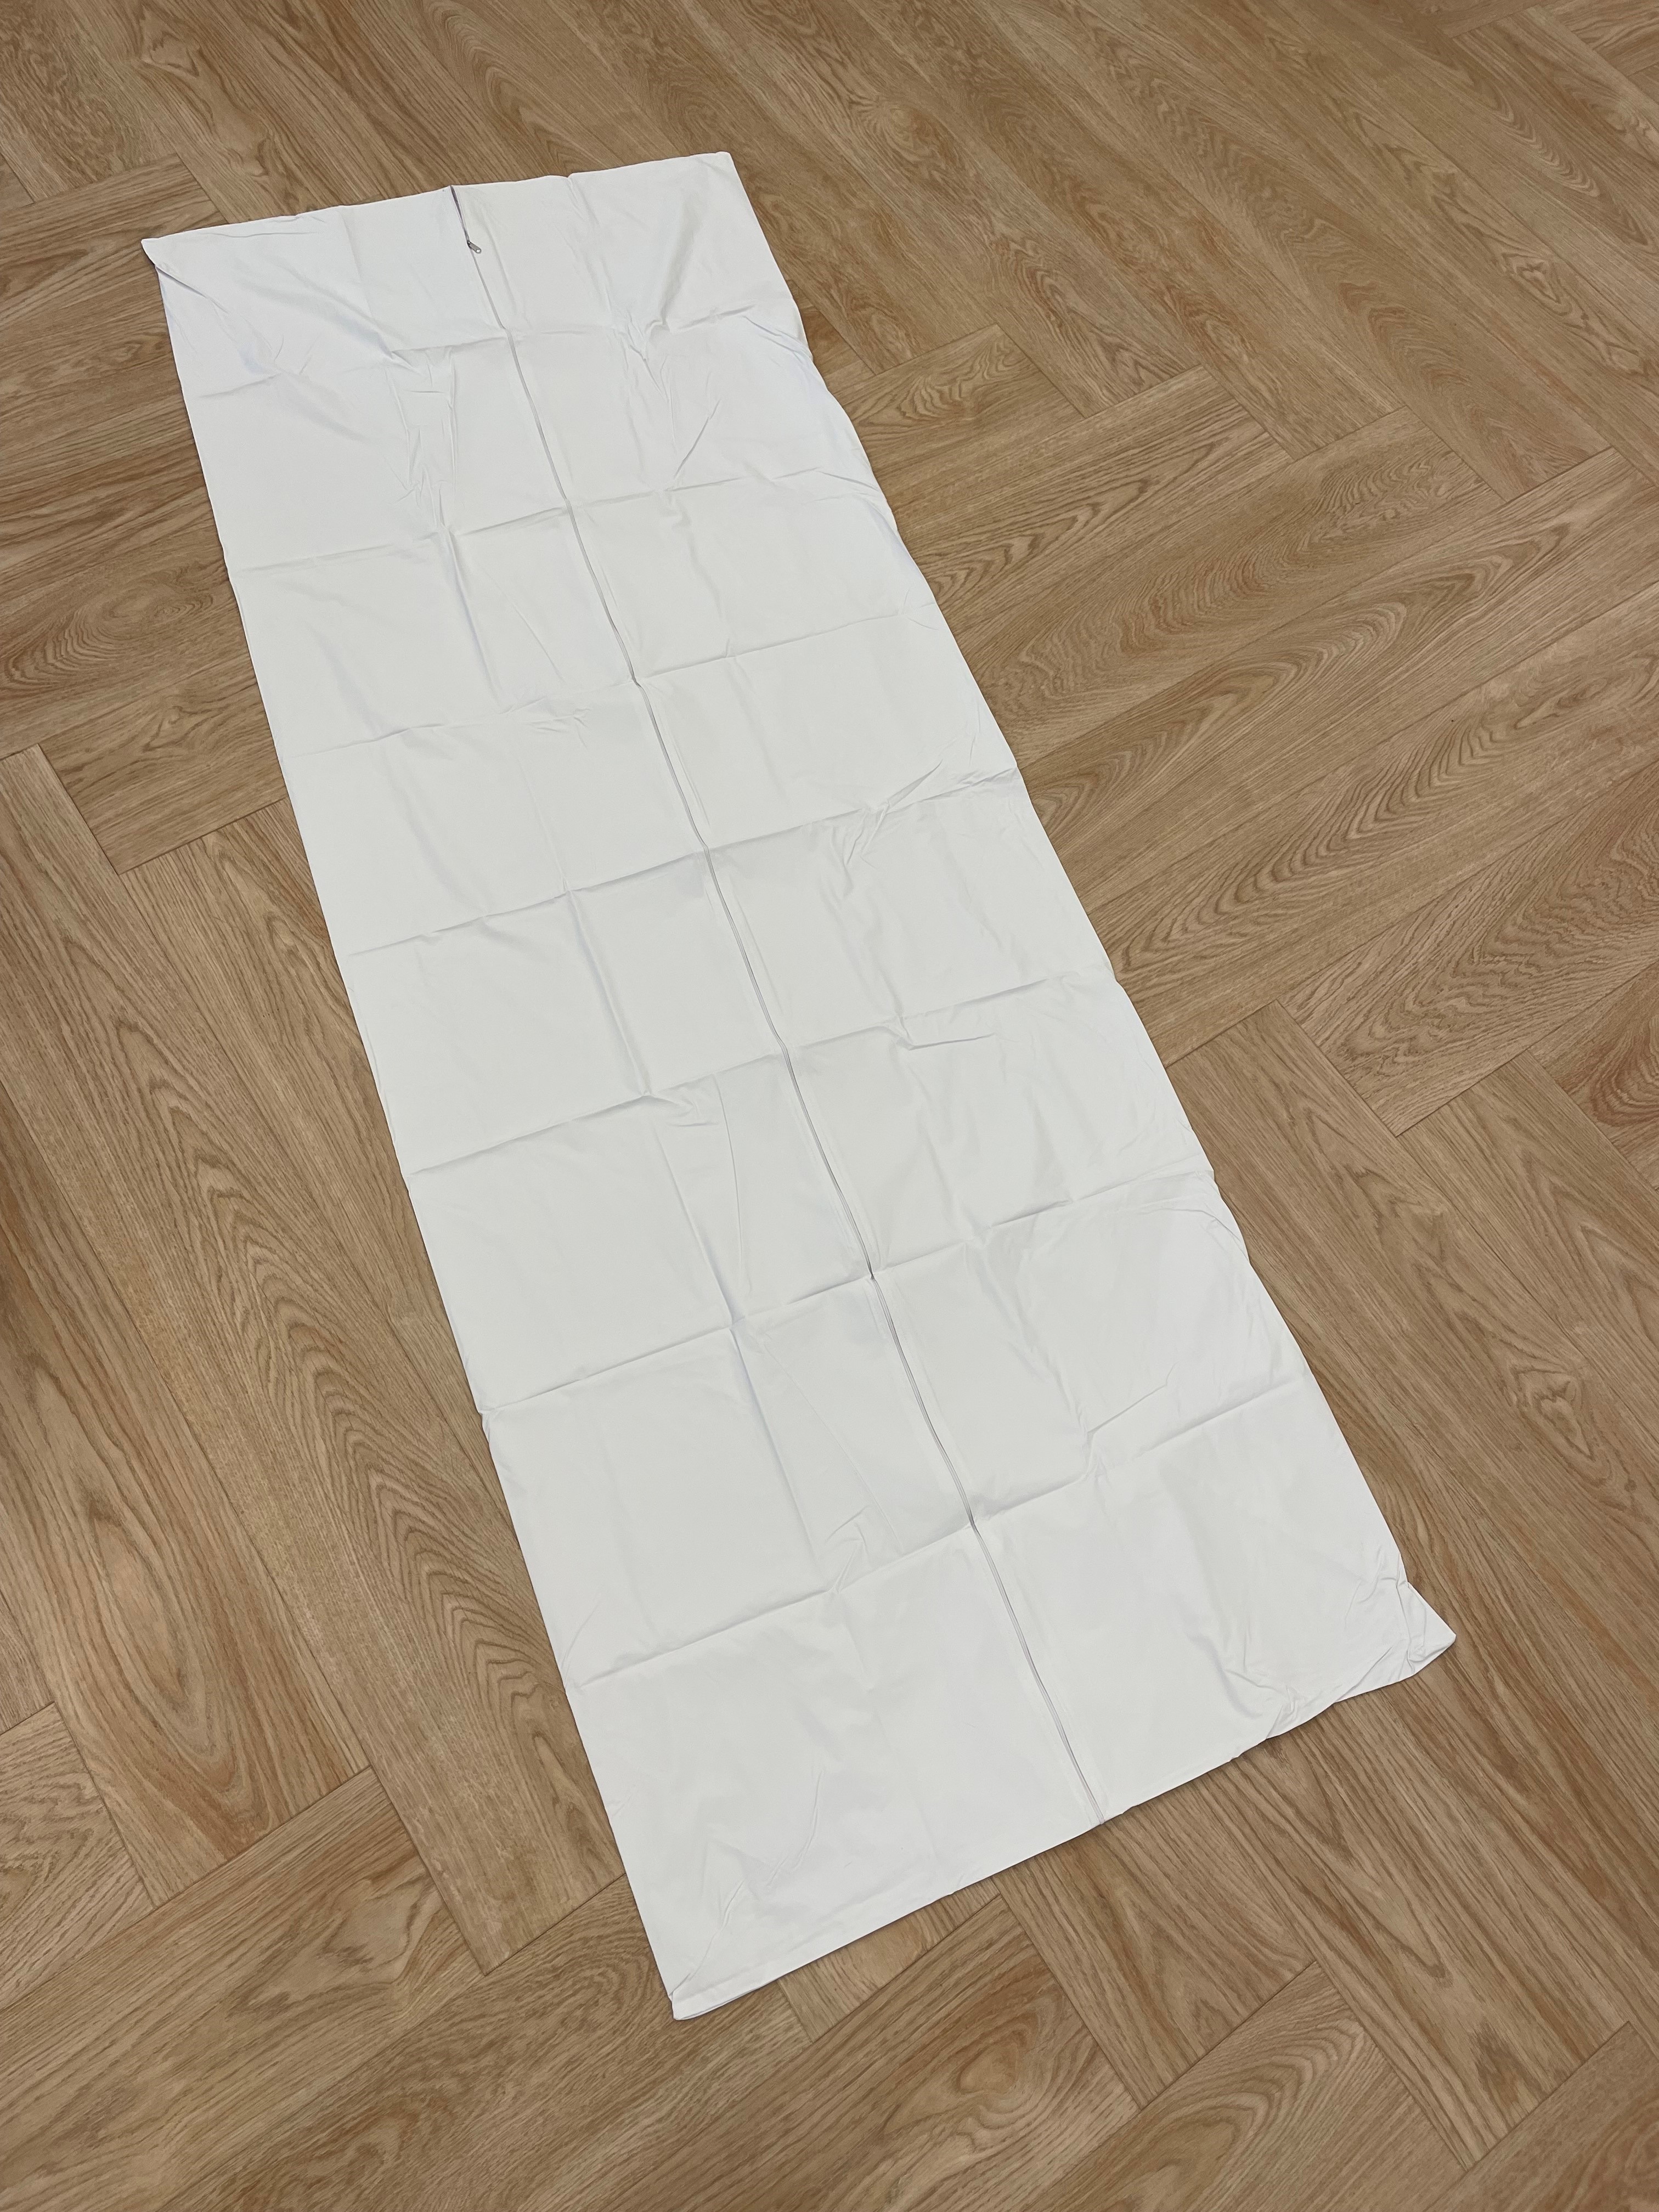 BODY-BAG-WH Romed body bags/mortuary bags, white, without handles, 220x80 cm, per piece in a polybag, 20 pcs in a carton.